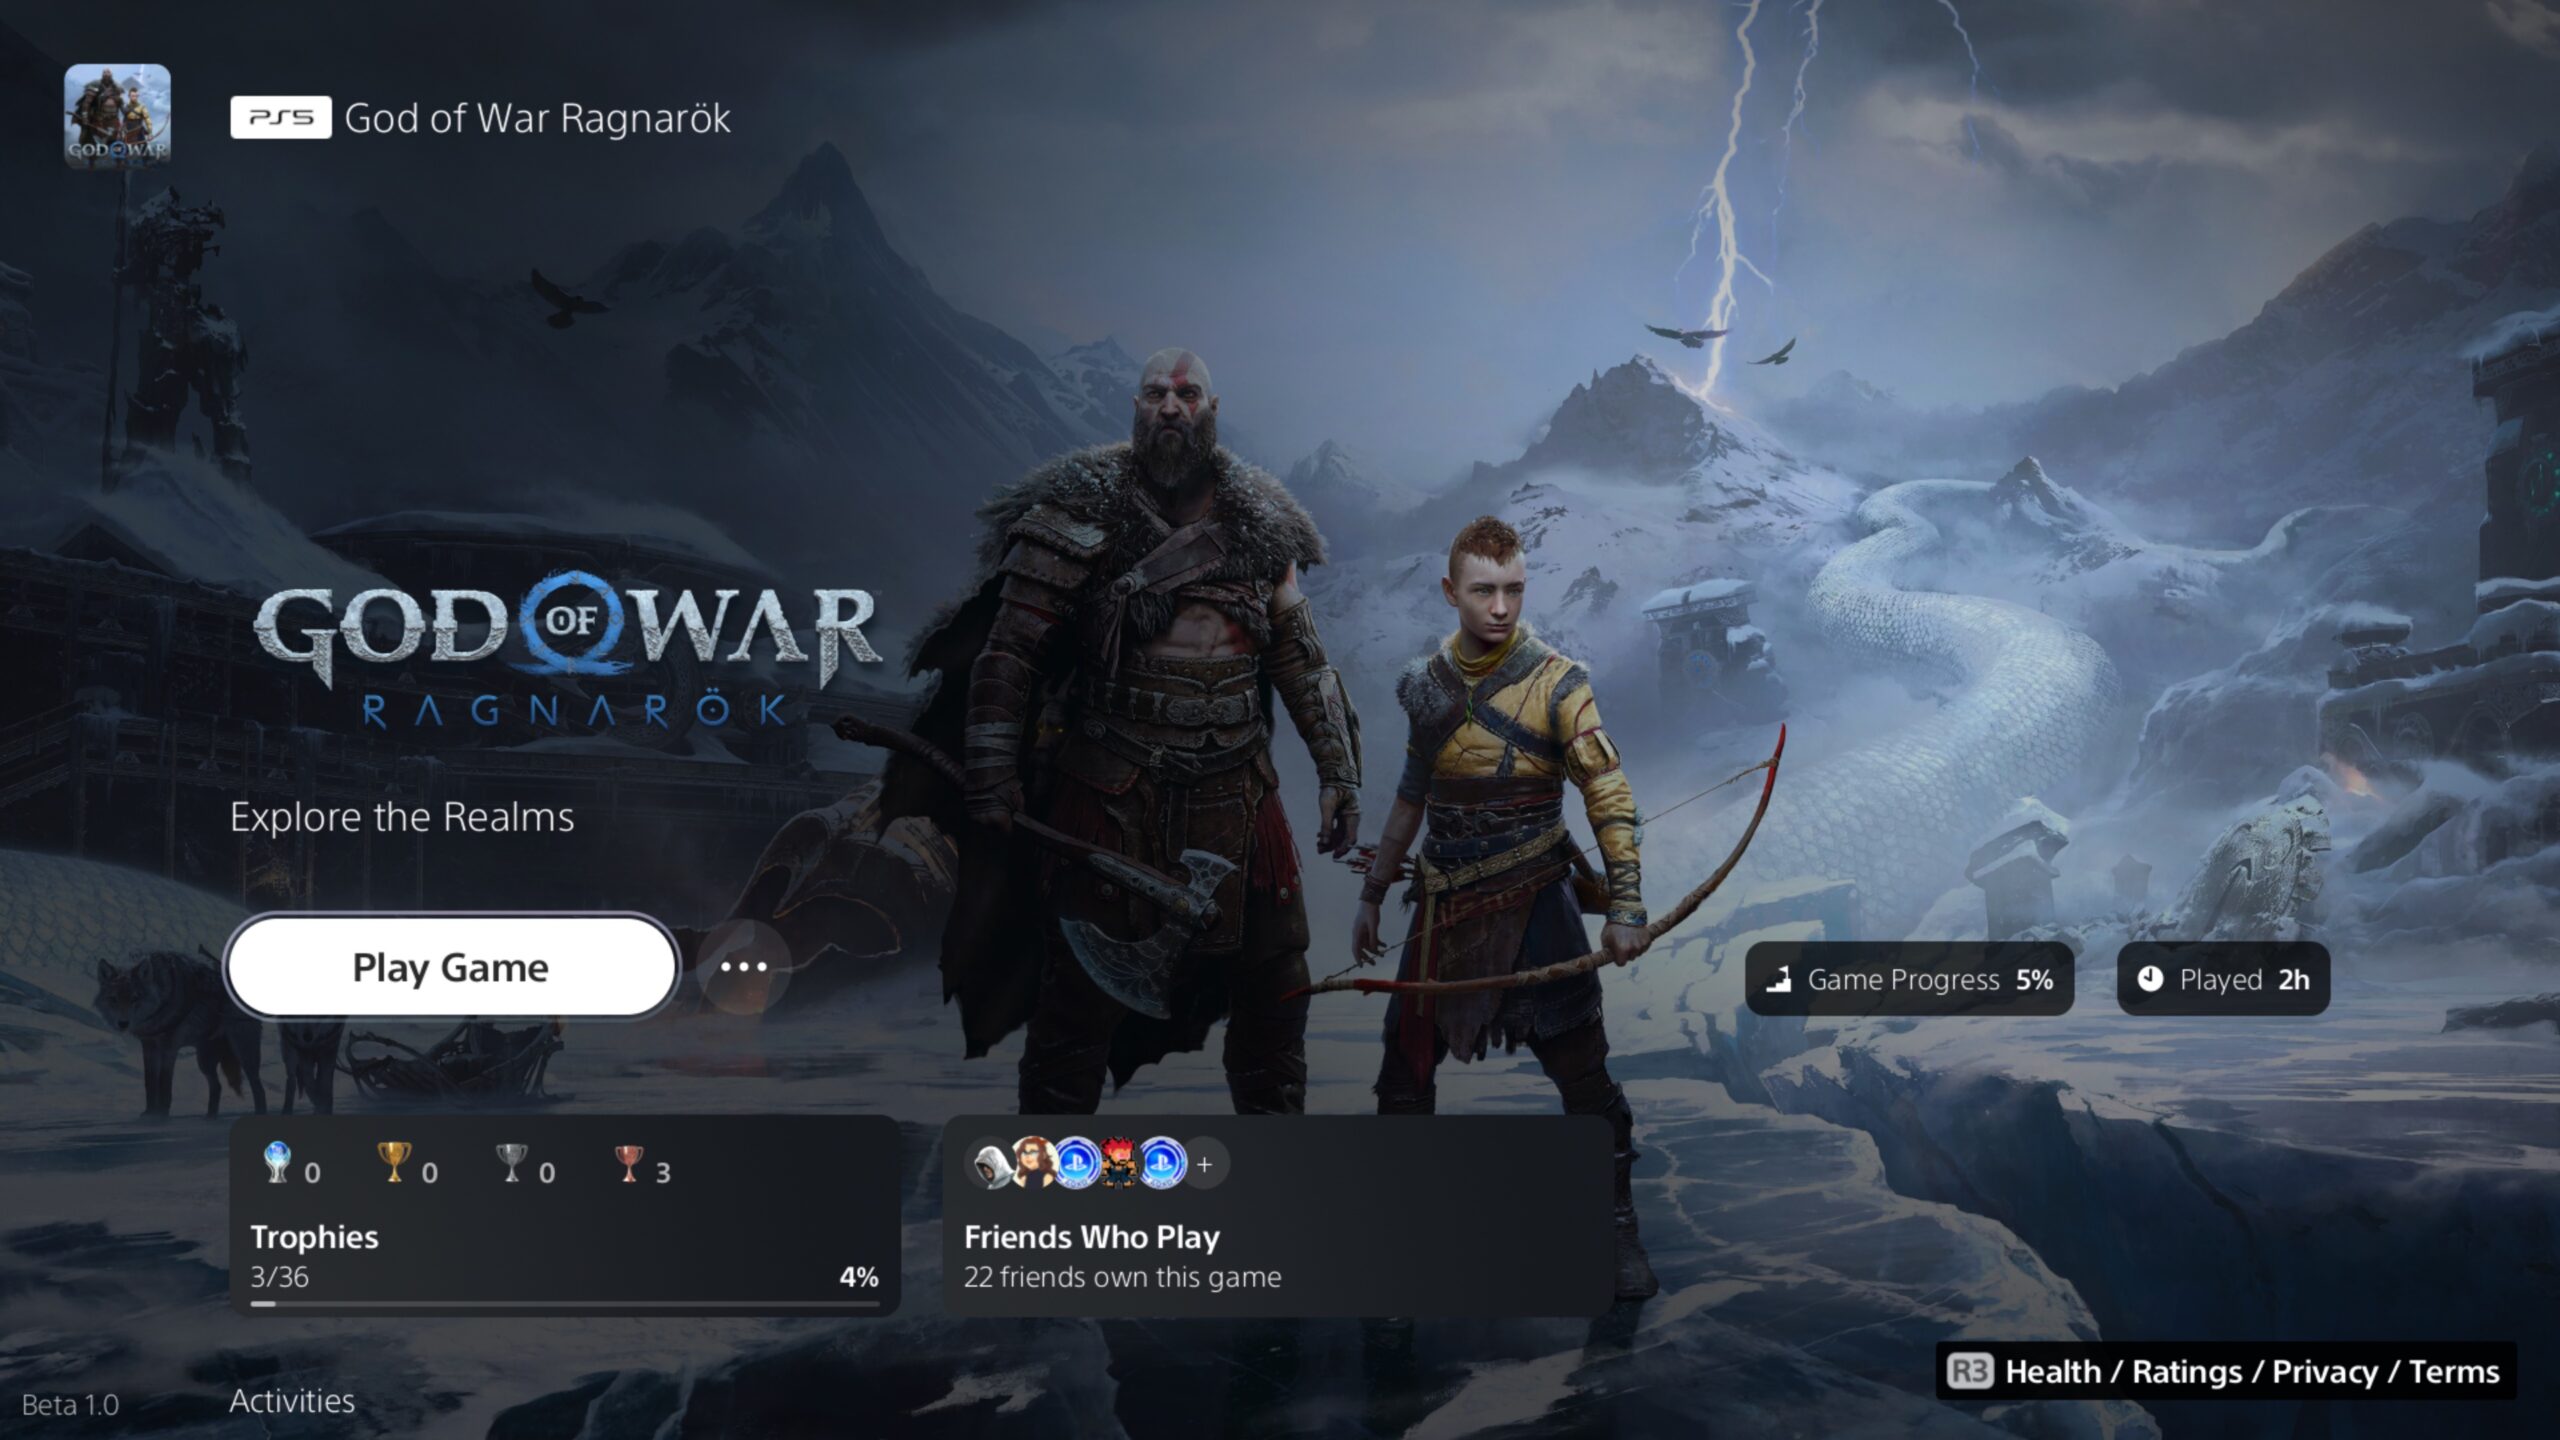  "PlayStation 5 UI screenshot showing new “Friends Who Play” tile in the God of War Ragnarok game hub"